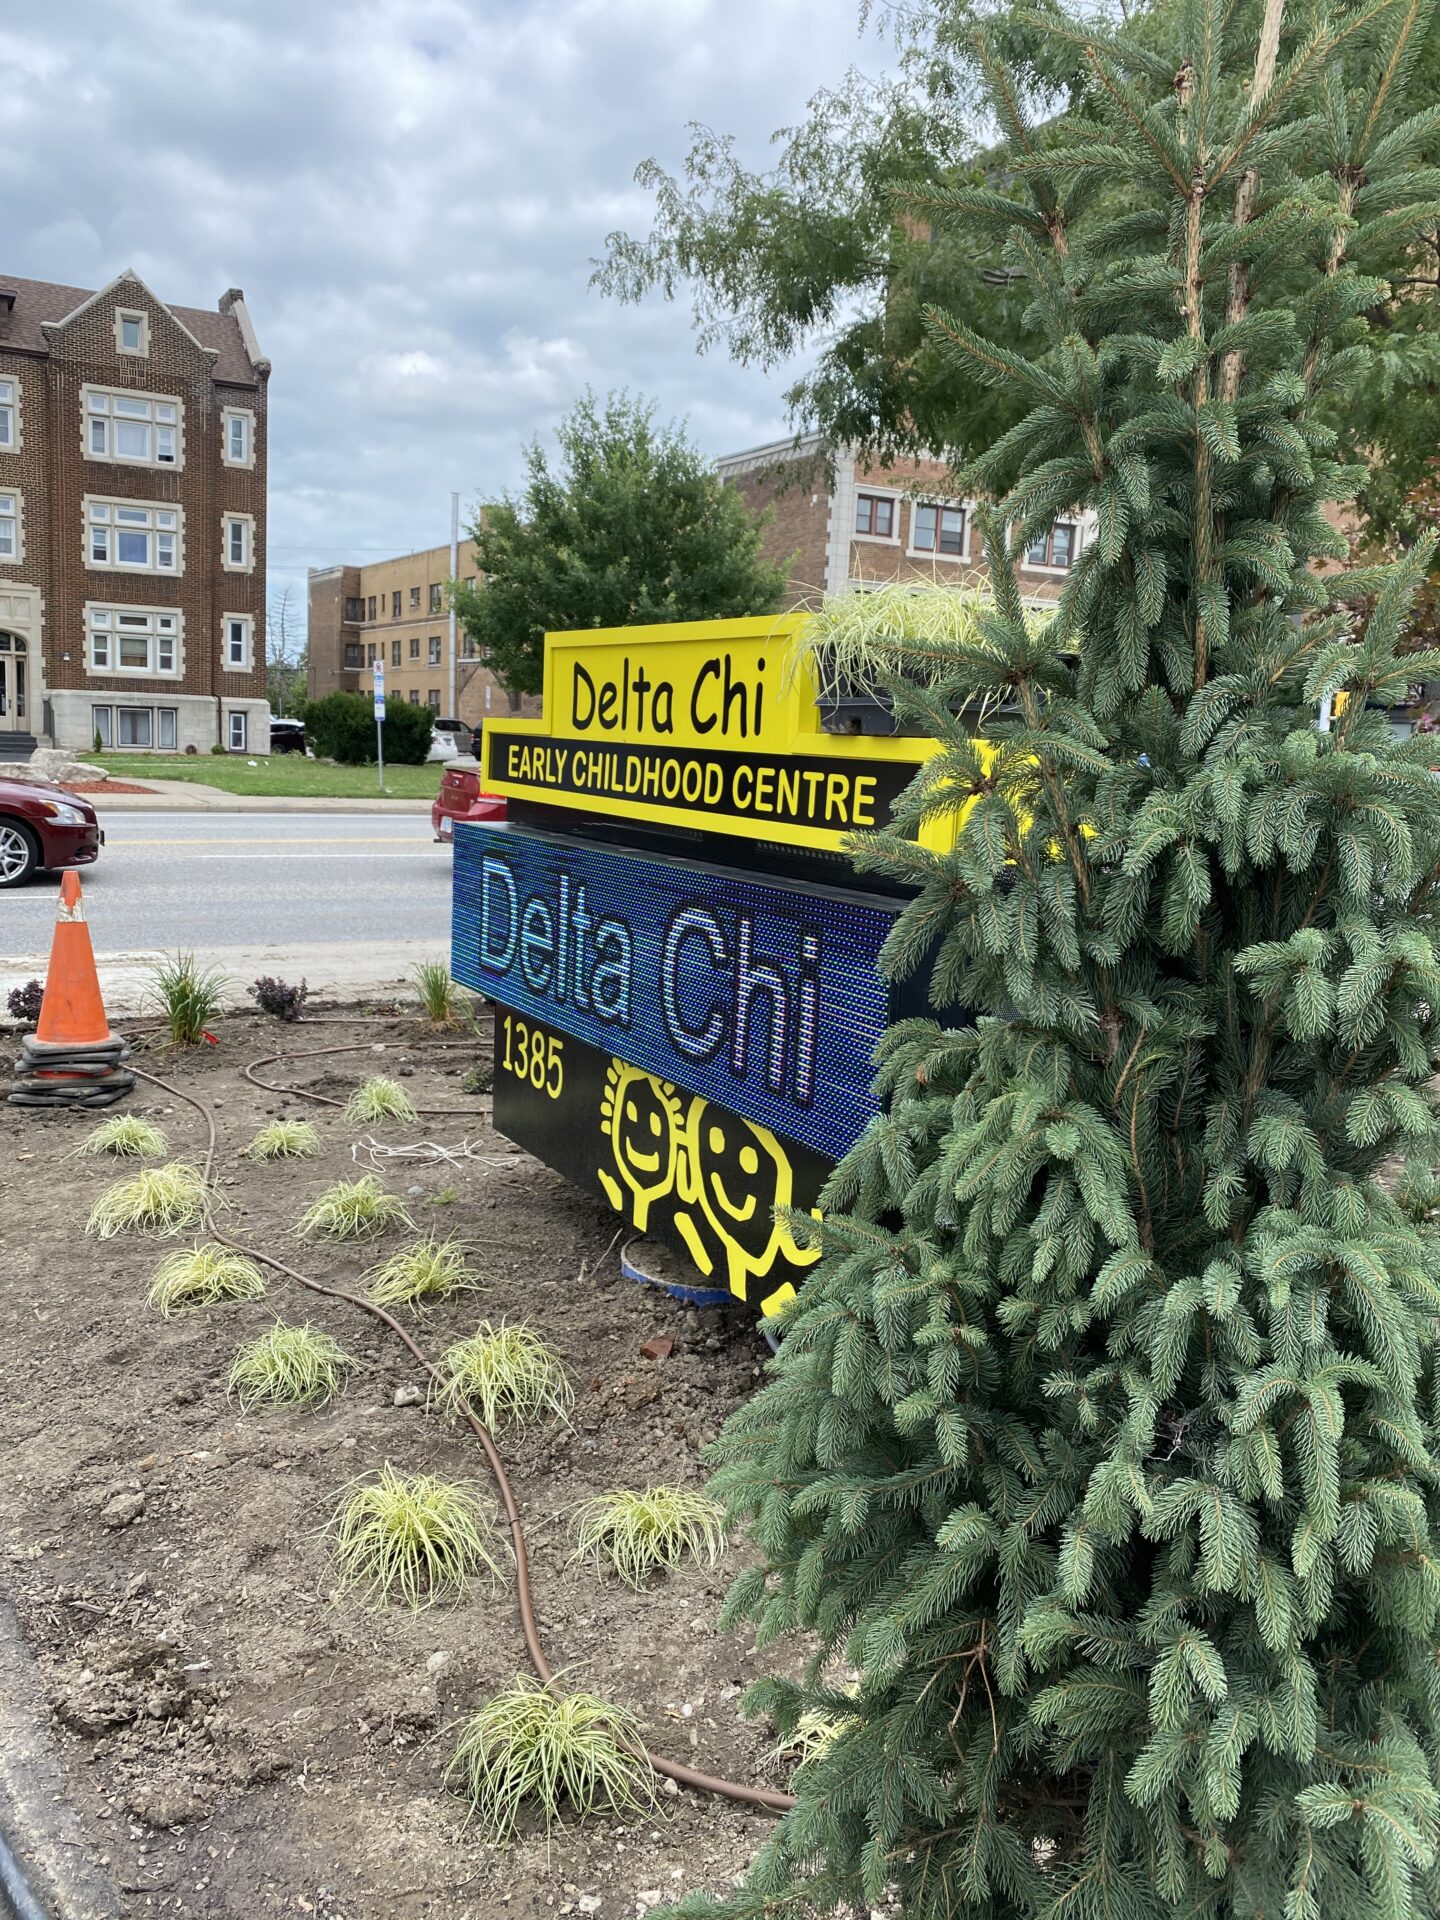 A digital sign for Delta Chi Early Childhood Centre is displayed beside a tree with landscaping. Tall buildings and a car are in the background.